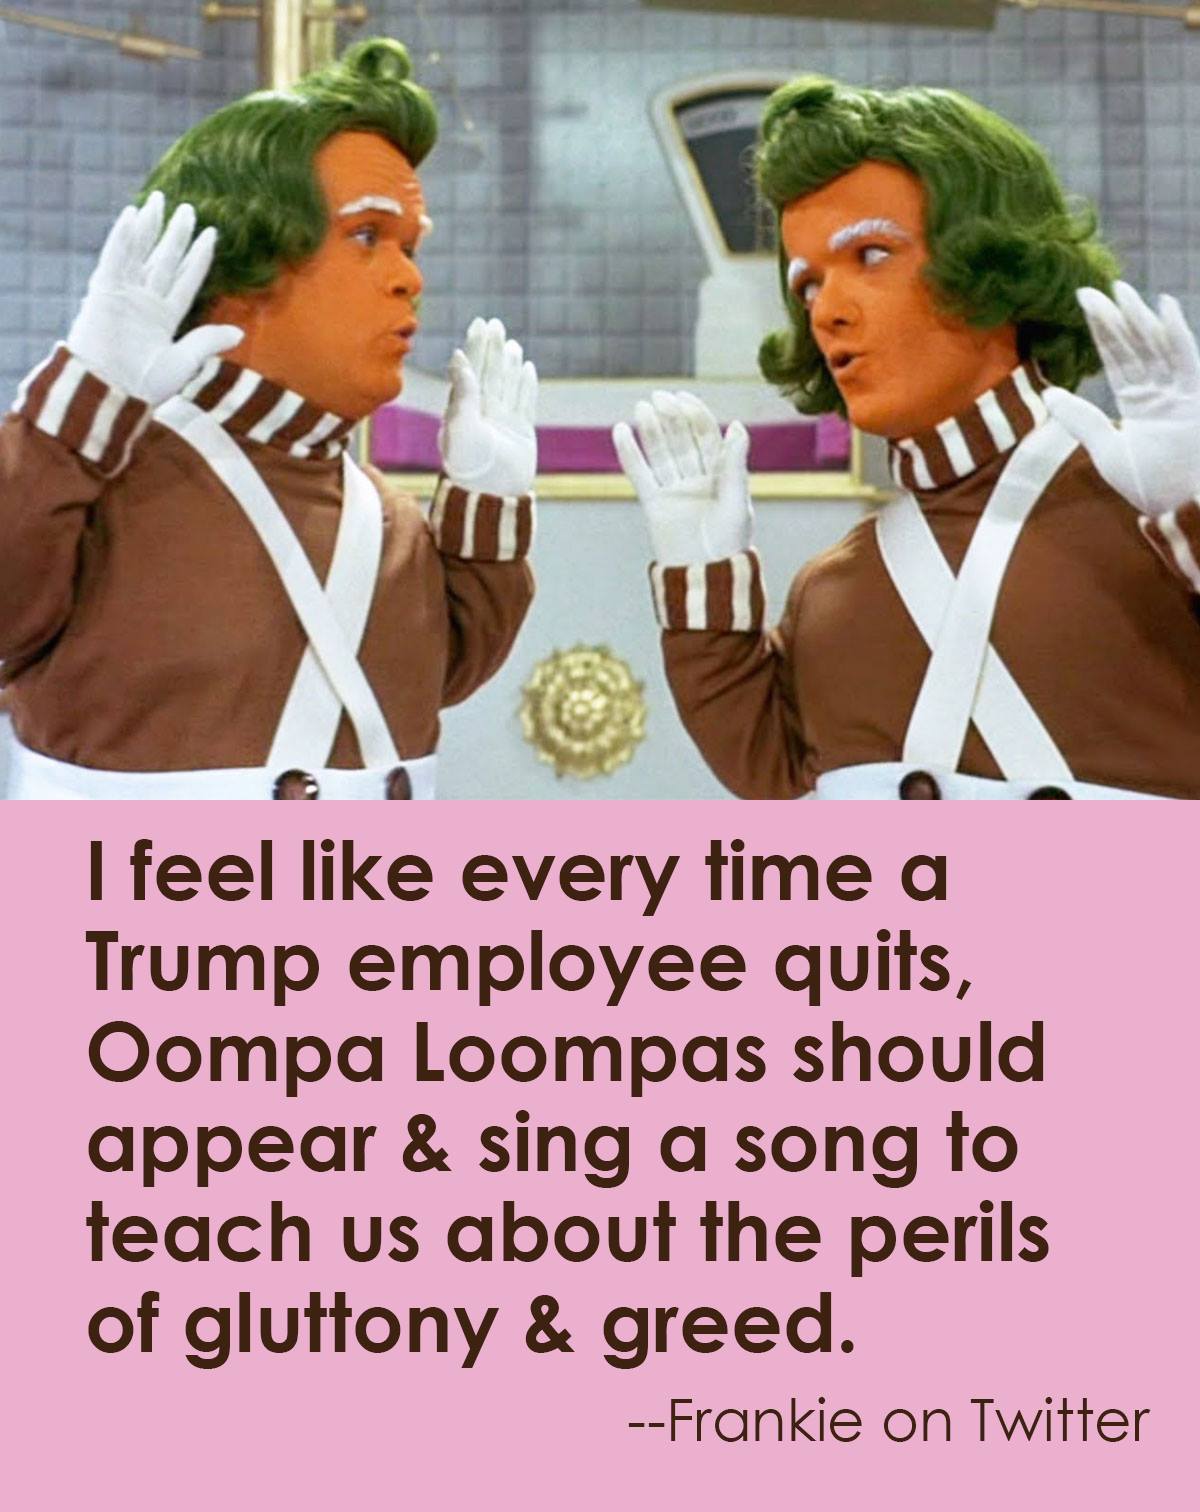 i feel like every time a trump employee quits, oompa loompas should appear and sing a song to teach us about the perils of gluttony and greed